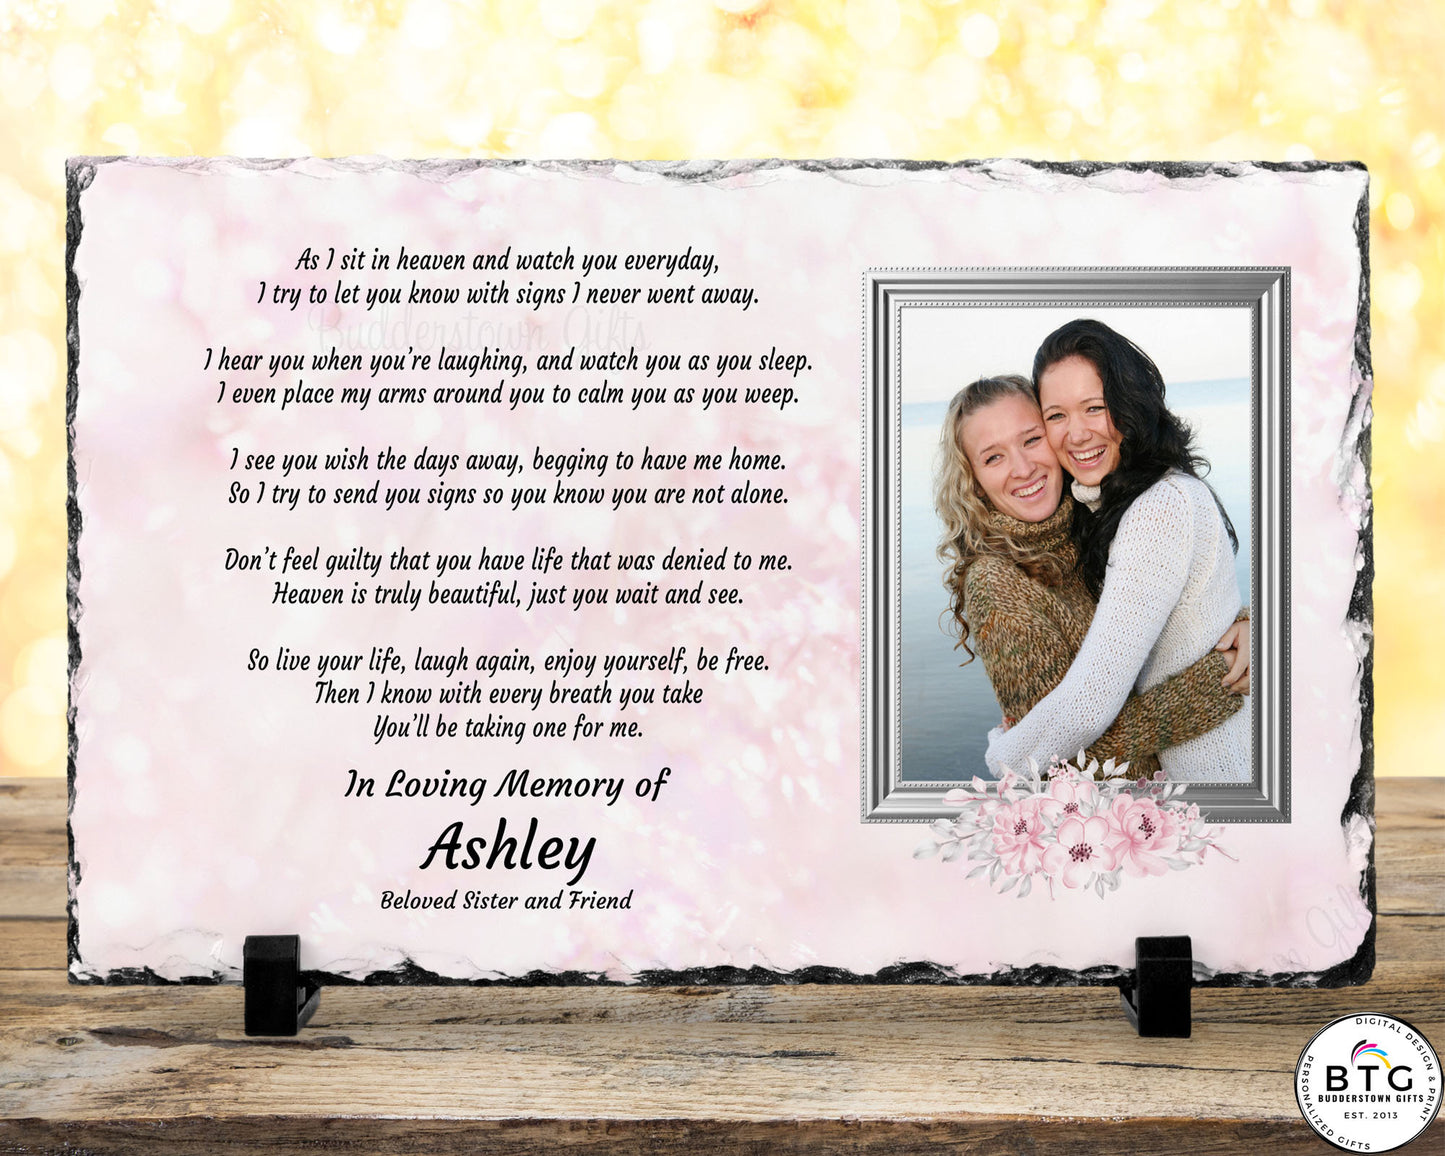  Photo Slate, adorned with a beautiful poem. This Memorial Slate serves as a thoughtful gesture for your grieving loved one, expressing your heartfelt care during this difficult time. 